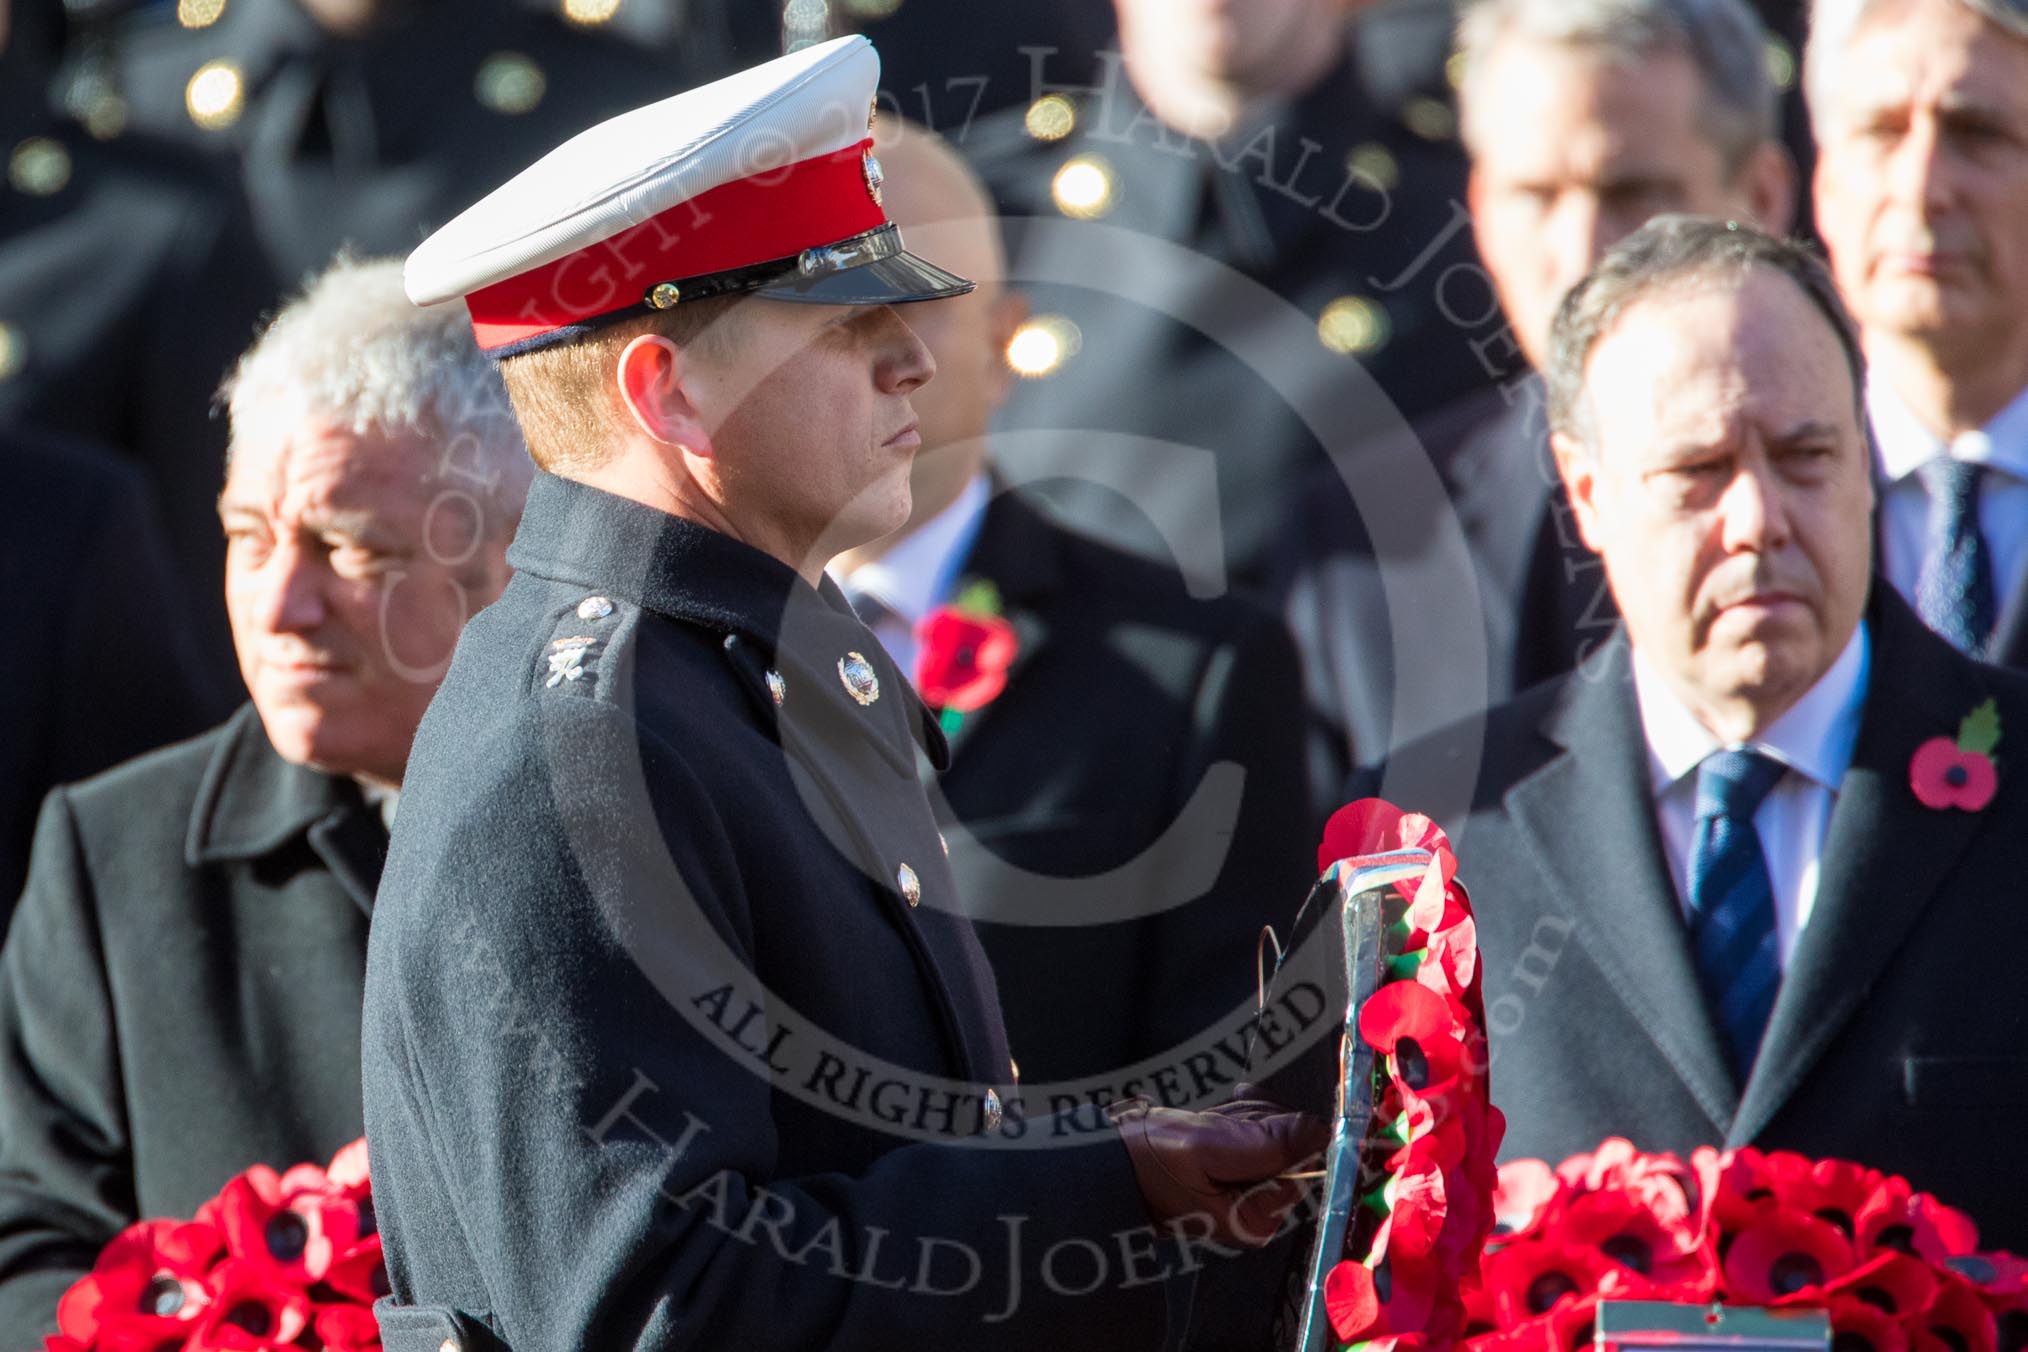 Major Thomas Scott, Royal Marines, Equerry to The Duke of Sussex, during Remembrance Sunday Cenotaph Ceremony 2018 at Horse Guards Parade, Westminster, London, 11 November 2018, 10:59.